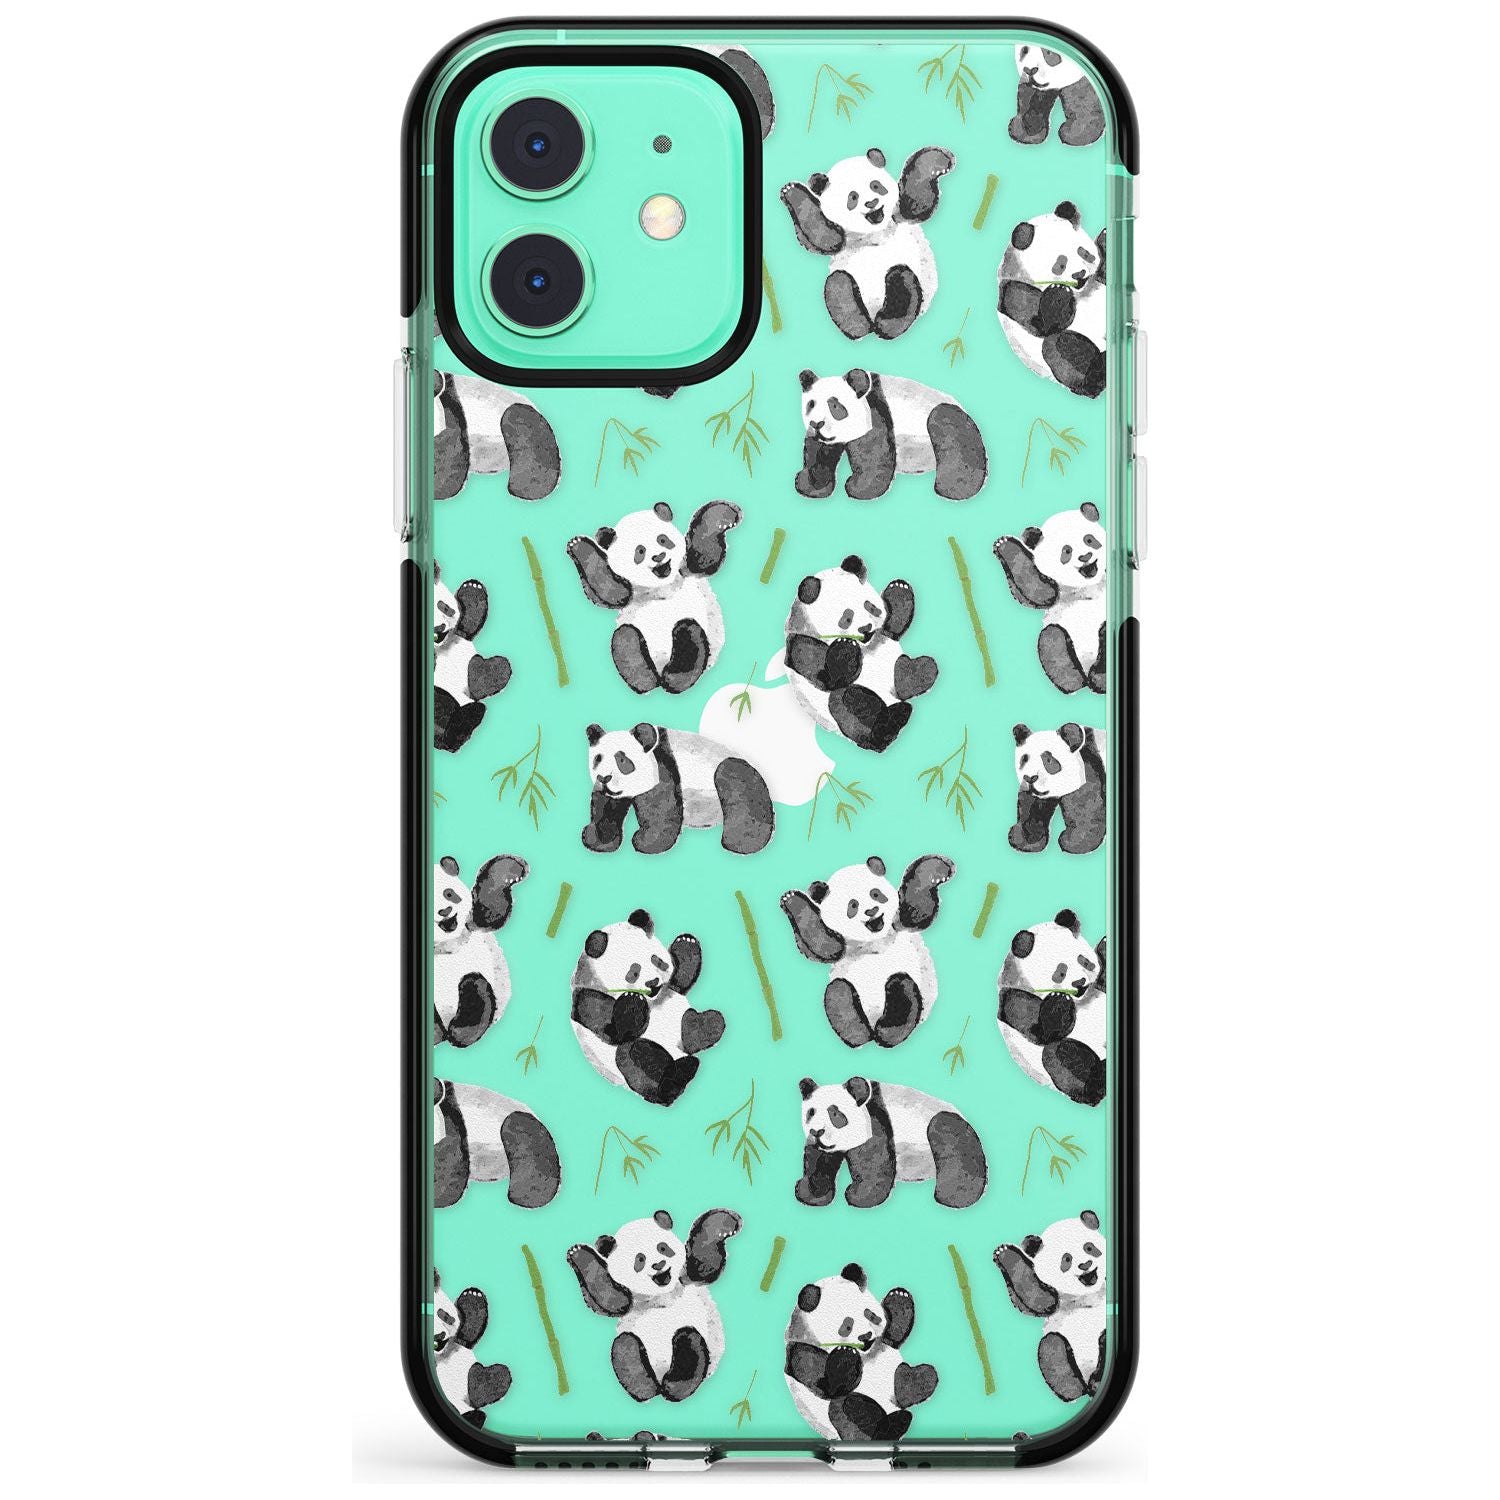 Watercolour Panda Pattern Pink Fade Impact Phone Case for iPhone 11 Pro Max